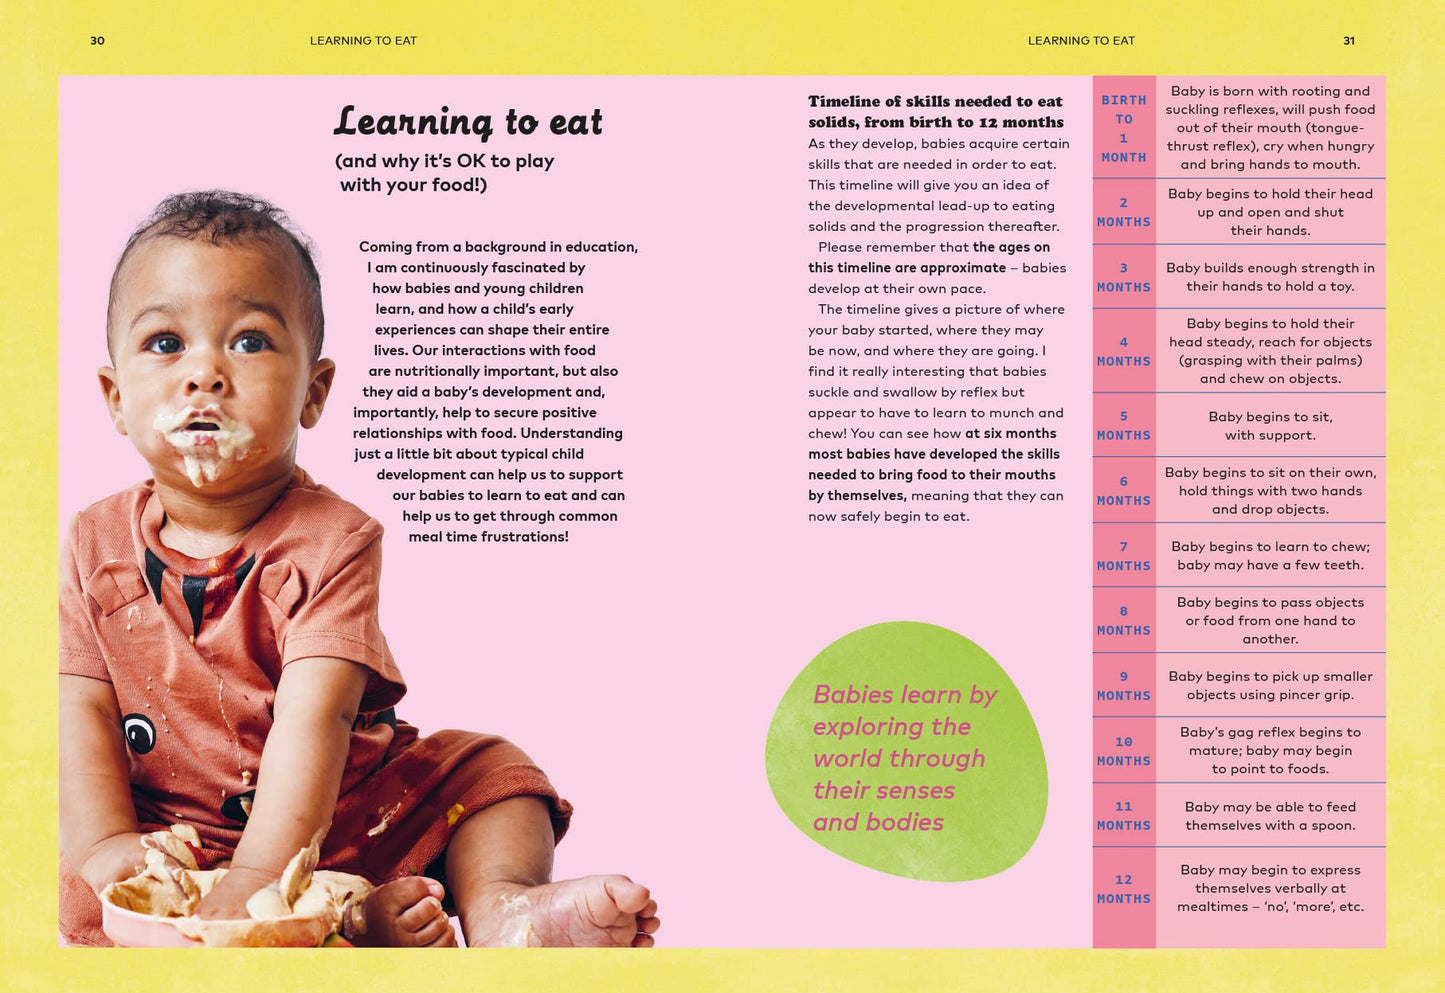 Intuitive Weaning: For Calm Mealtimes and Happy Babies – Jo Weston HB